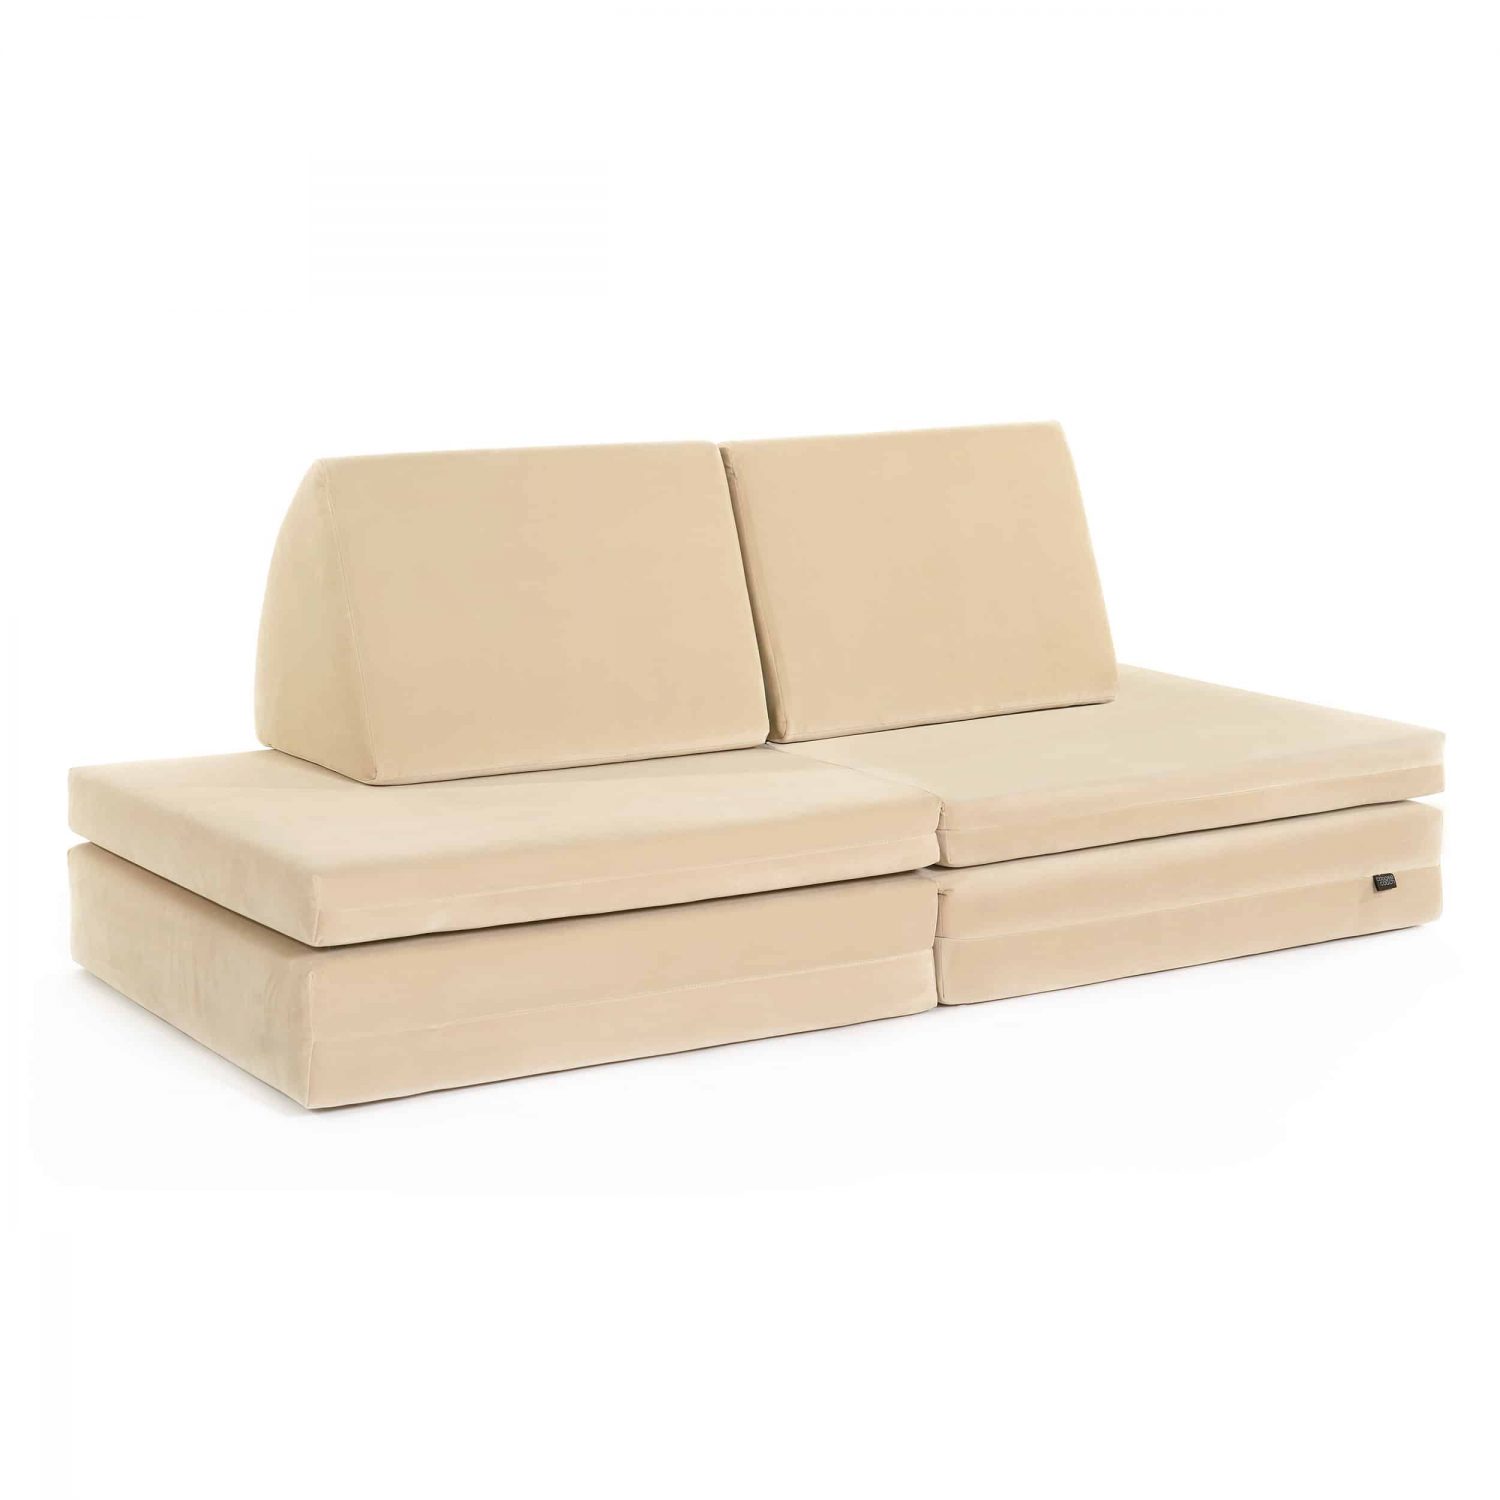 coogeecouch | kids sofa | series: chasingthesand | color: linen-white beige | view: front slanted | made in Germany